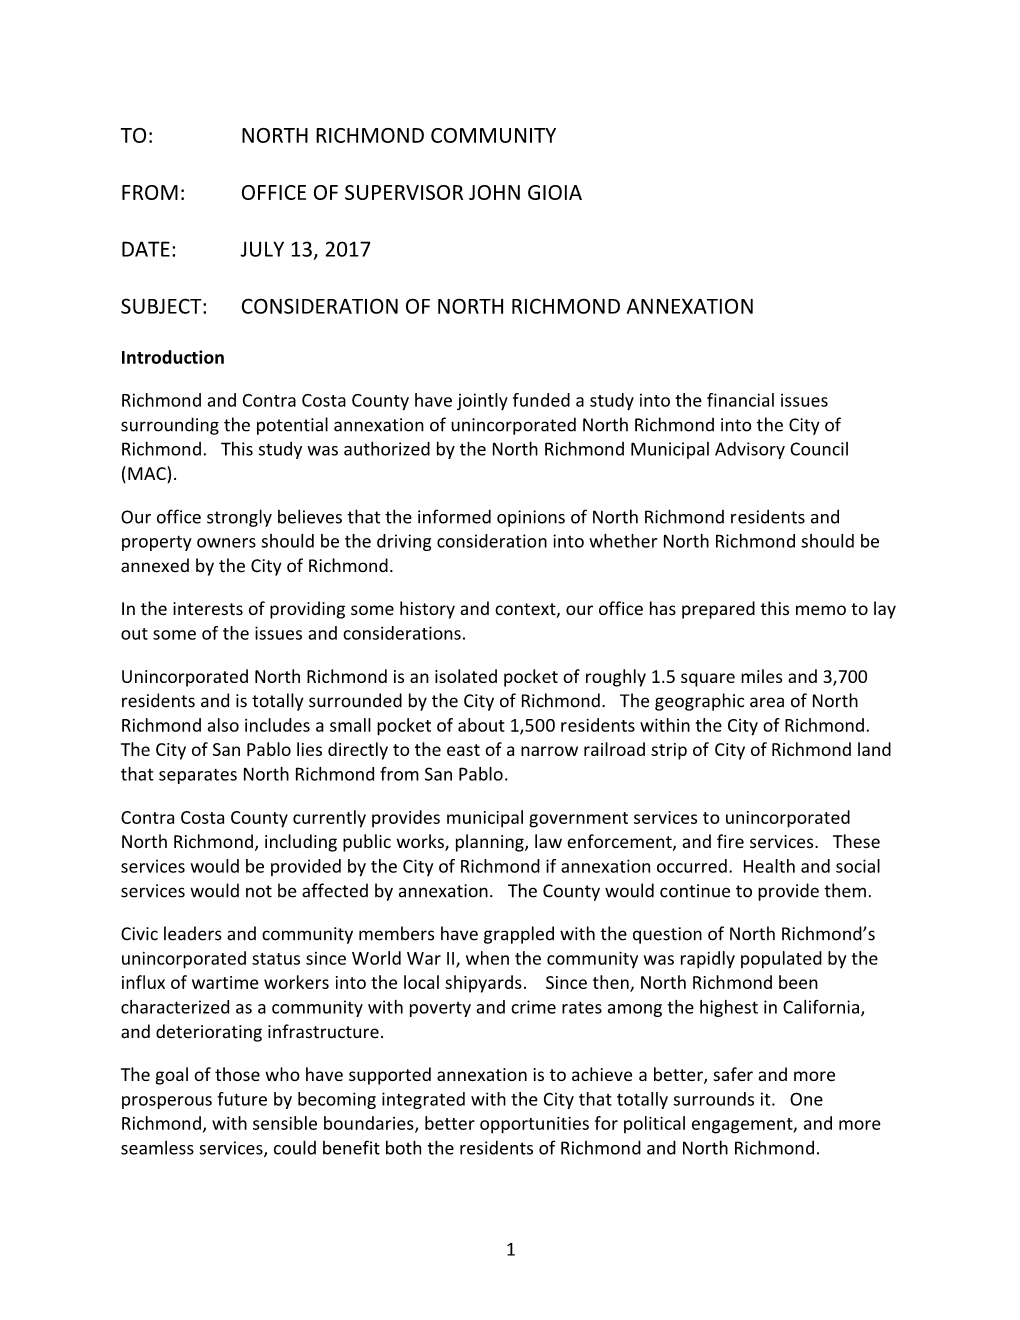 North Richmond Community From: Office of Supervisor John Gioia Date